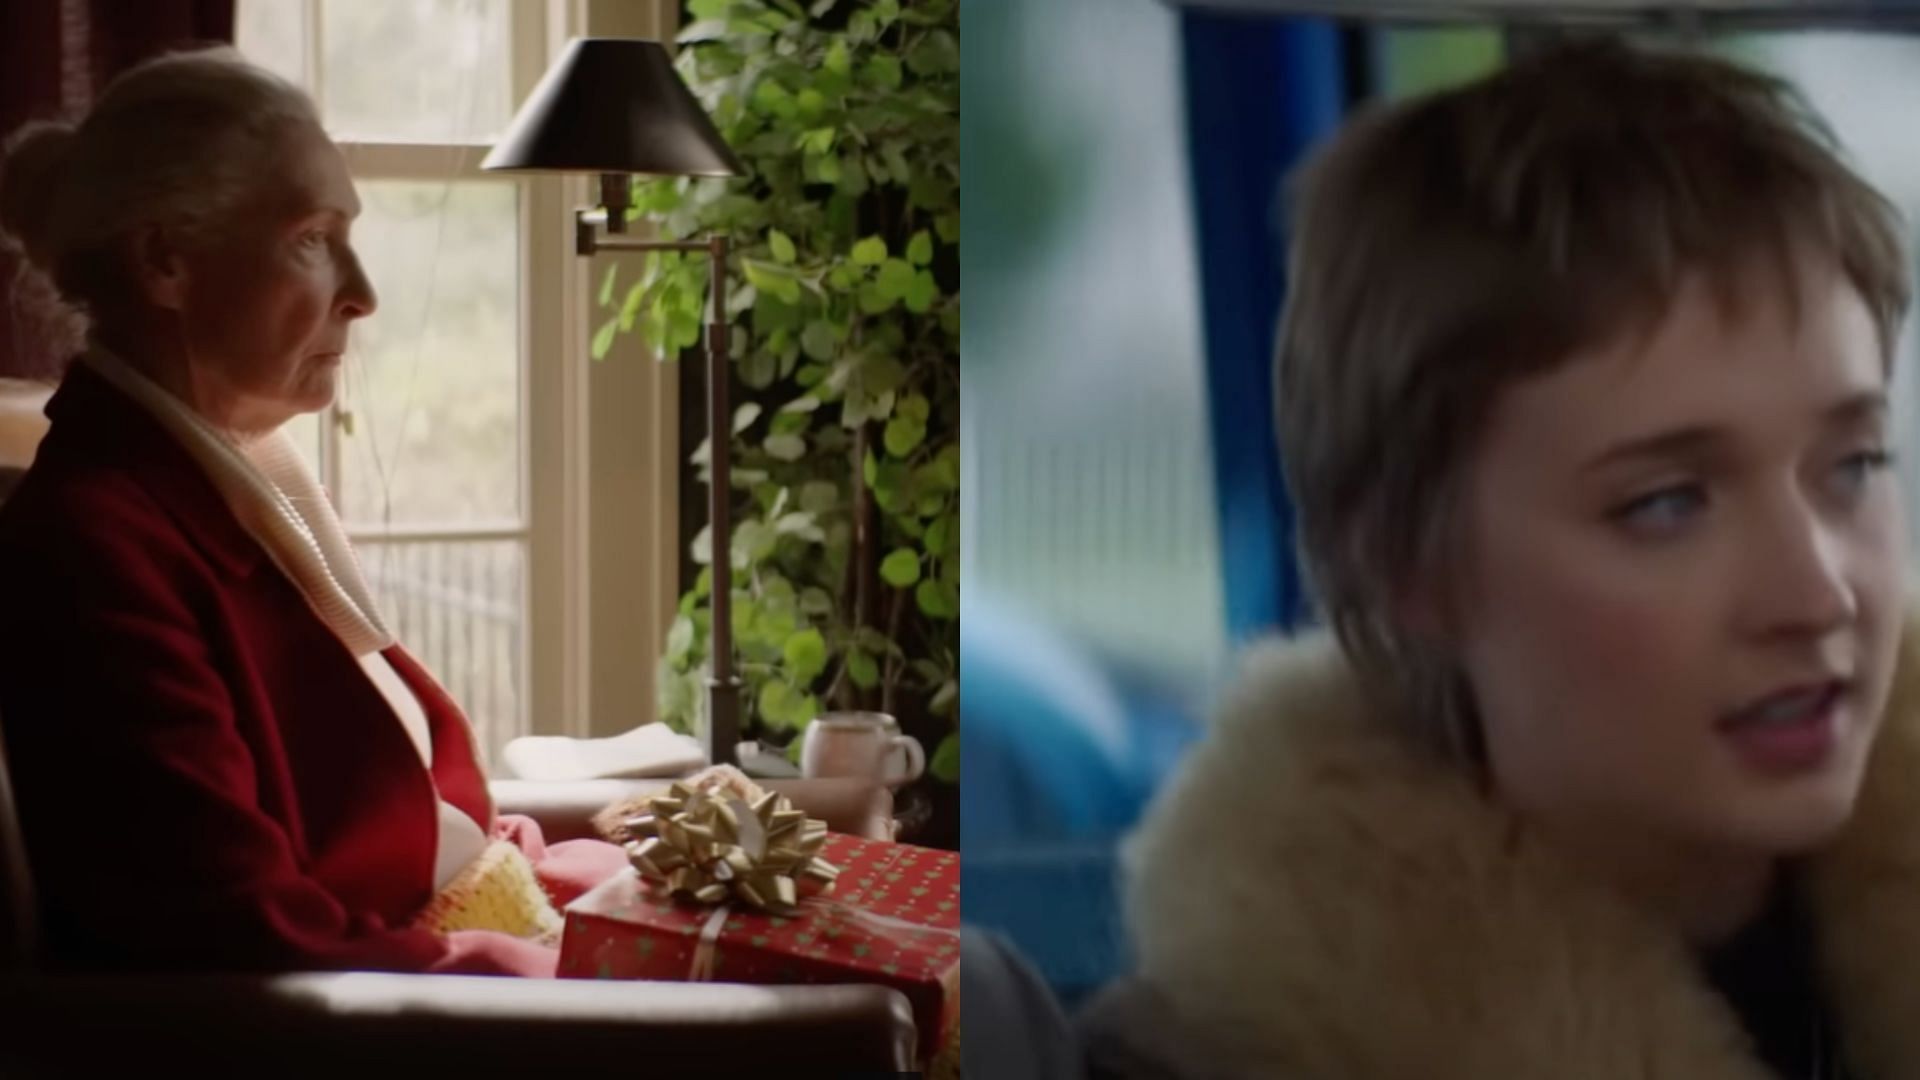 Chevrolet holiday commercial wins hearts online (Image via snip from YouTube/@Chevrolet)